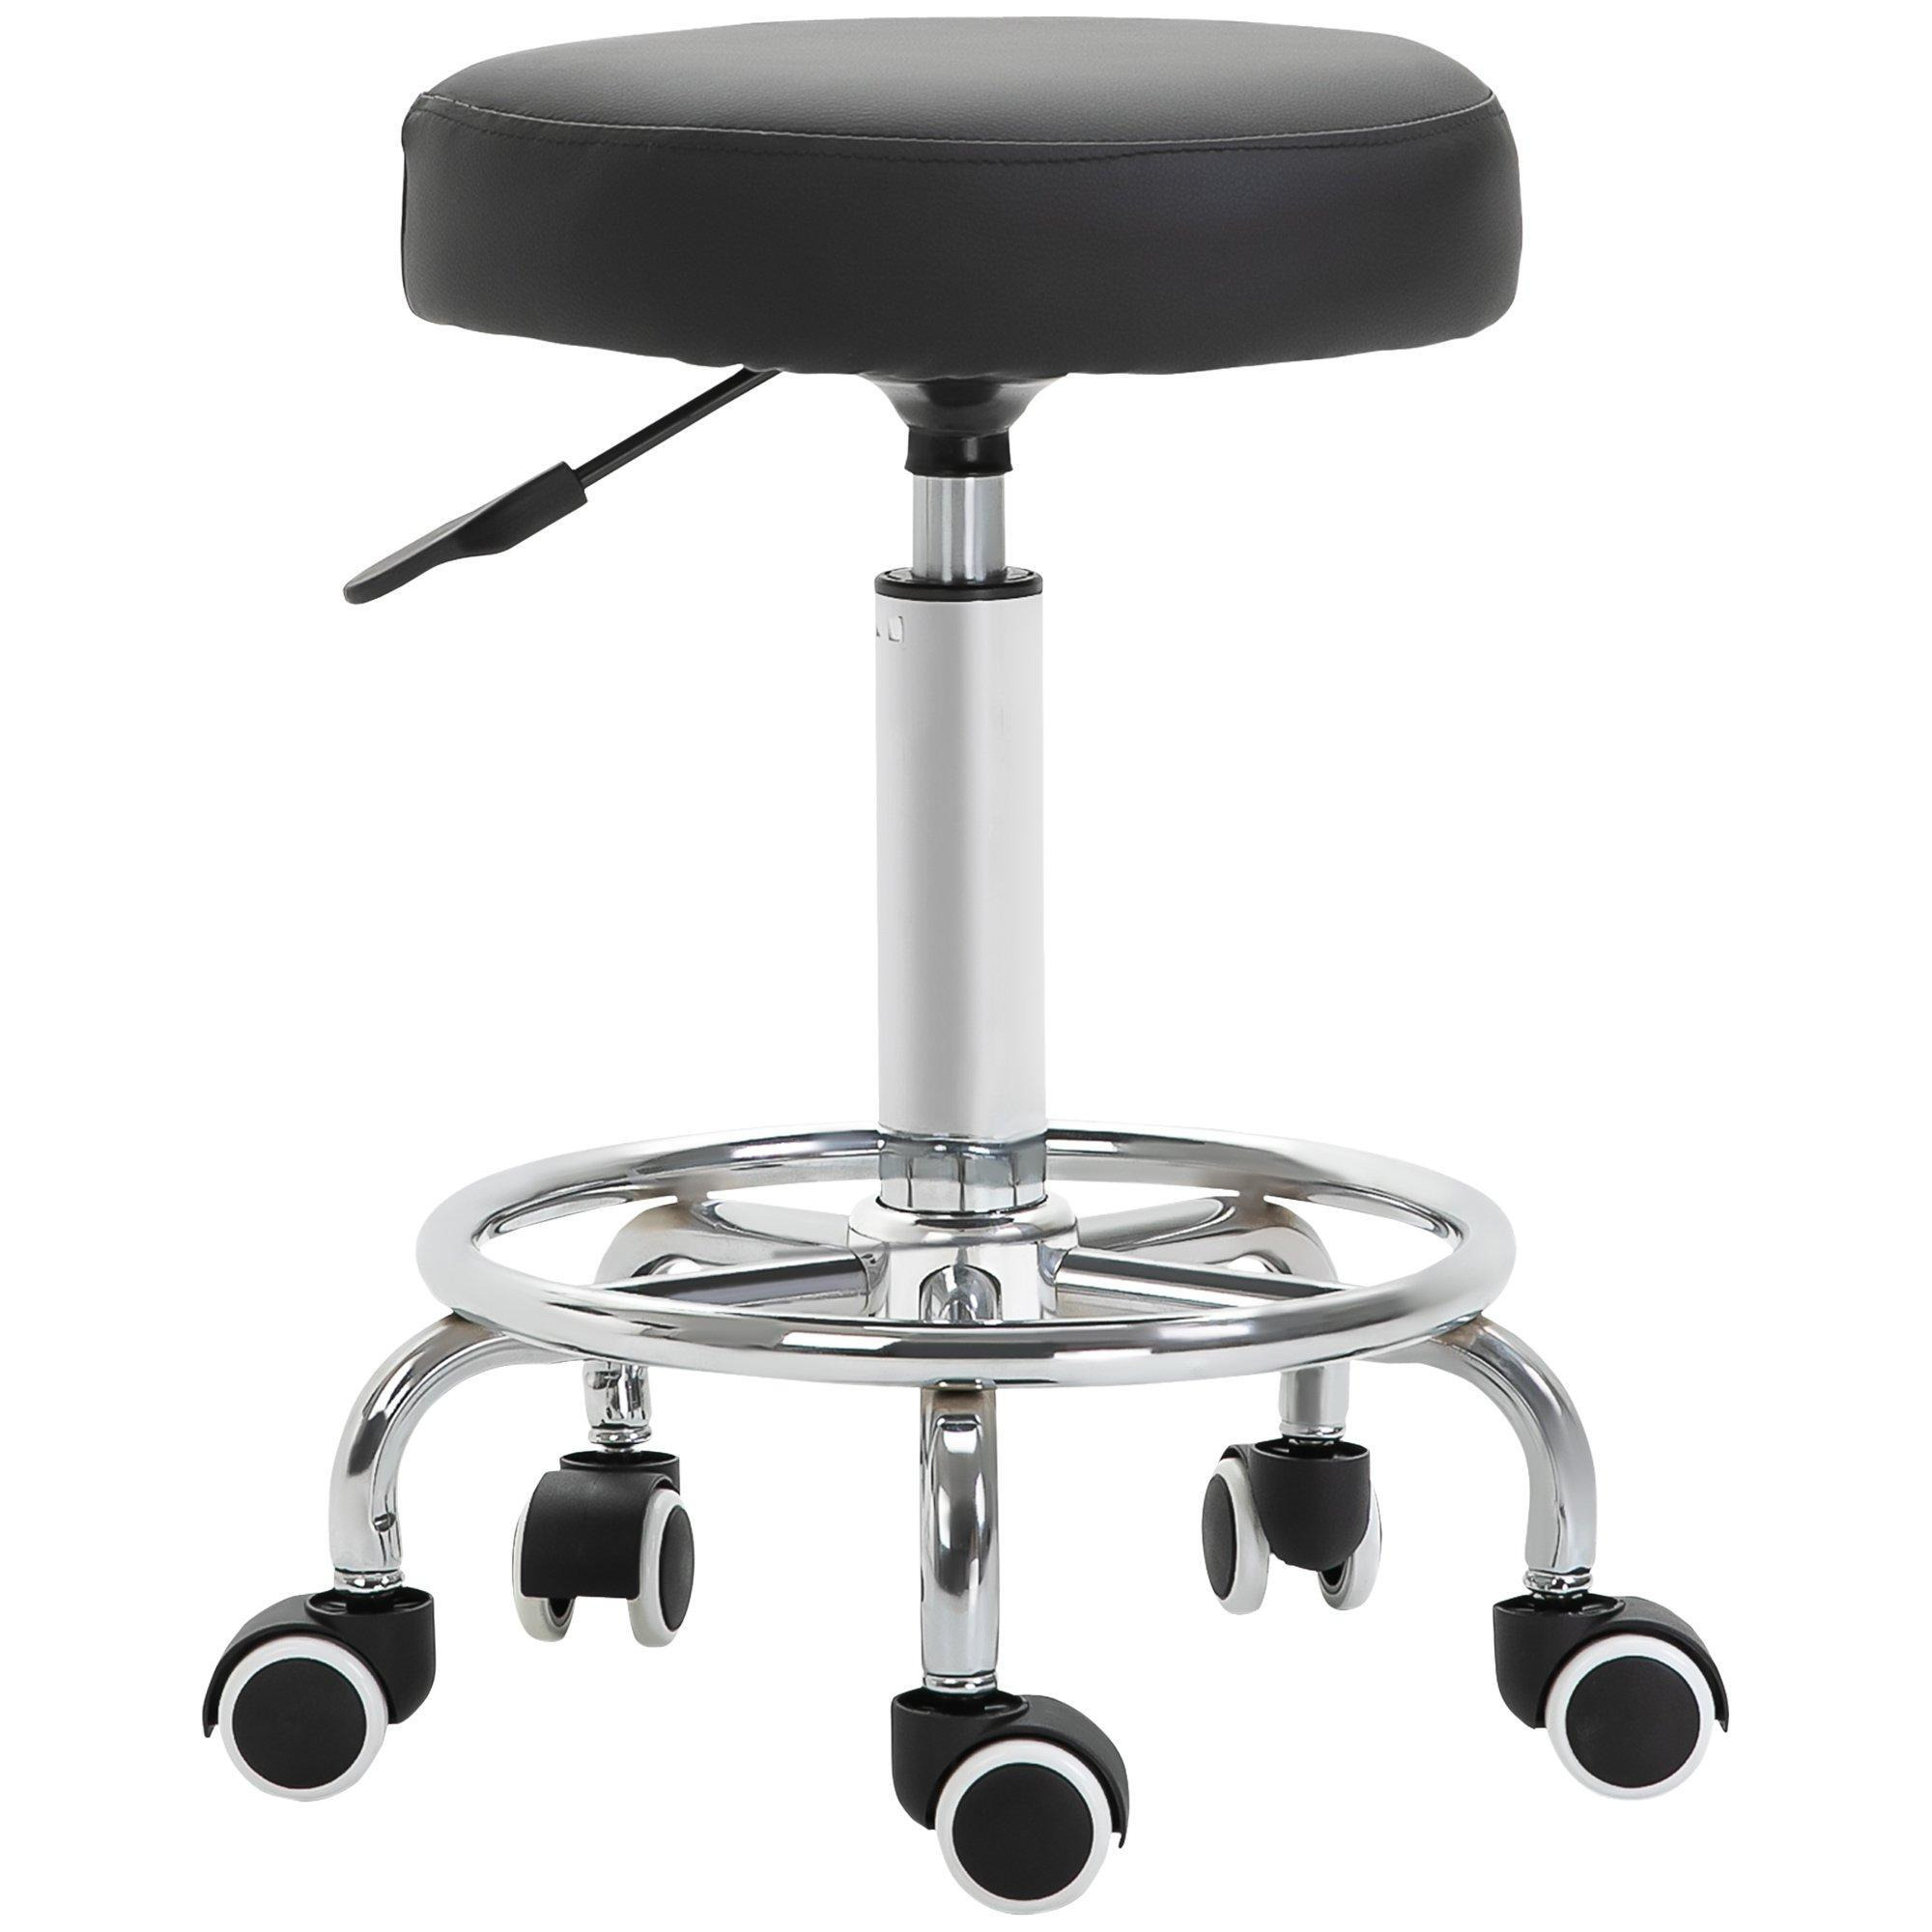 PU Leather Salon Working Beautician Stool Adjustable Height with Footrest - image 1